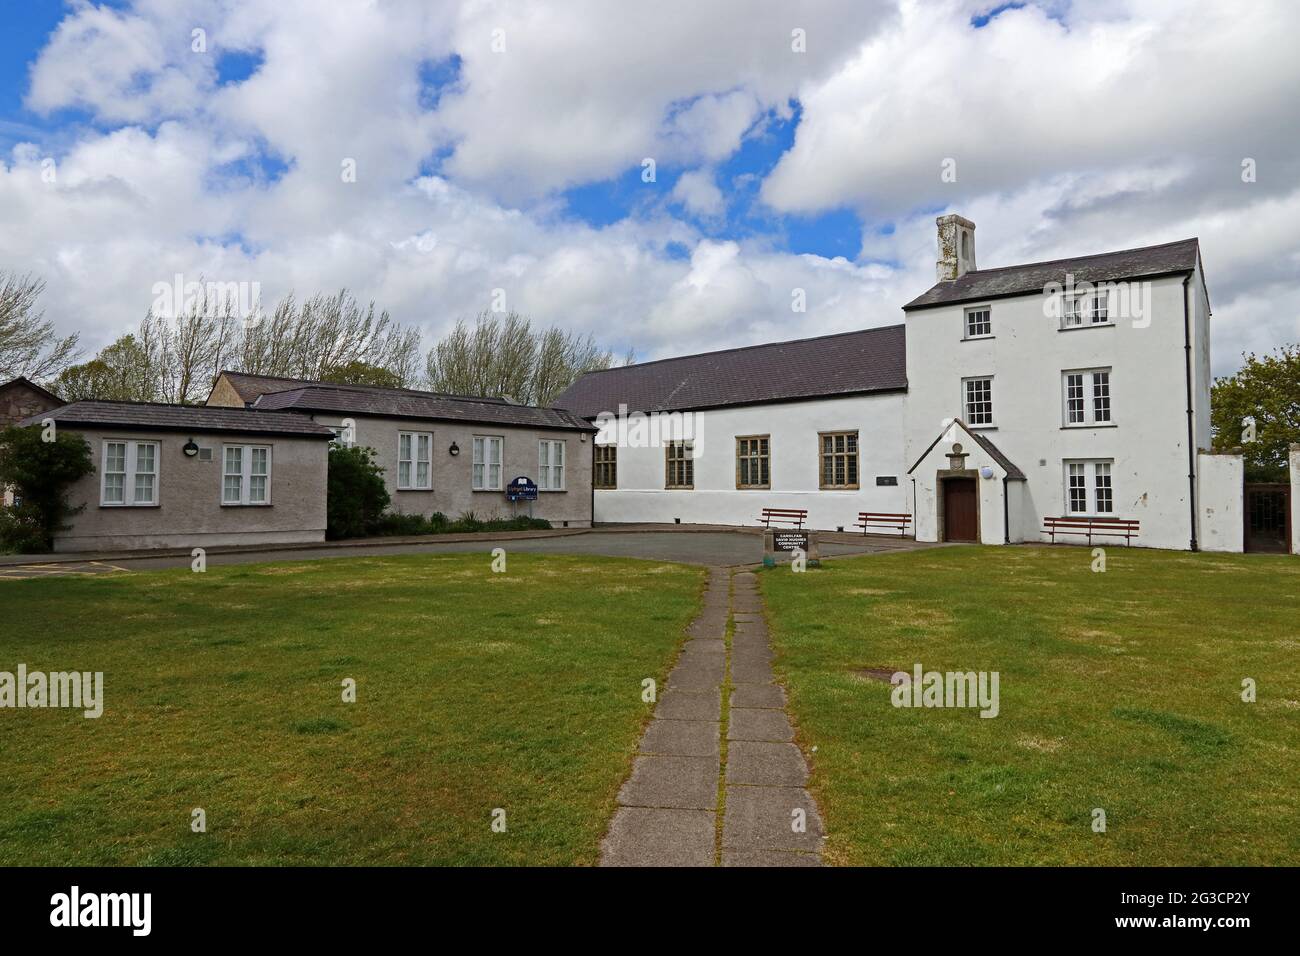 Canolfan David Hughes Community Centre and Llyfrgell Library, Beaumaris, Angelsey Stock Photo